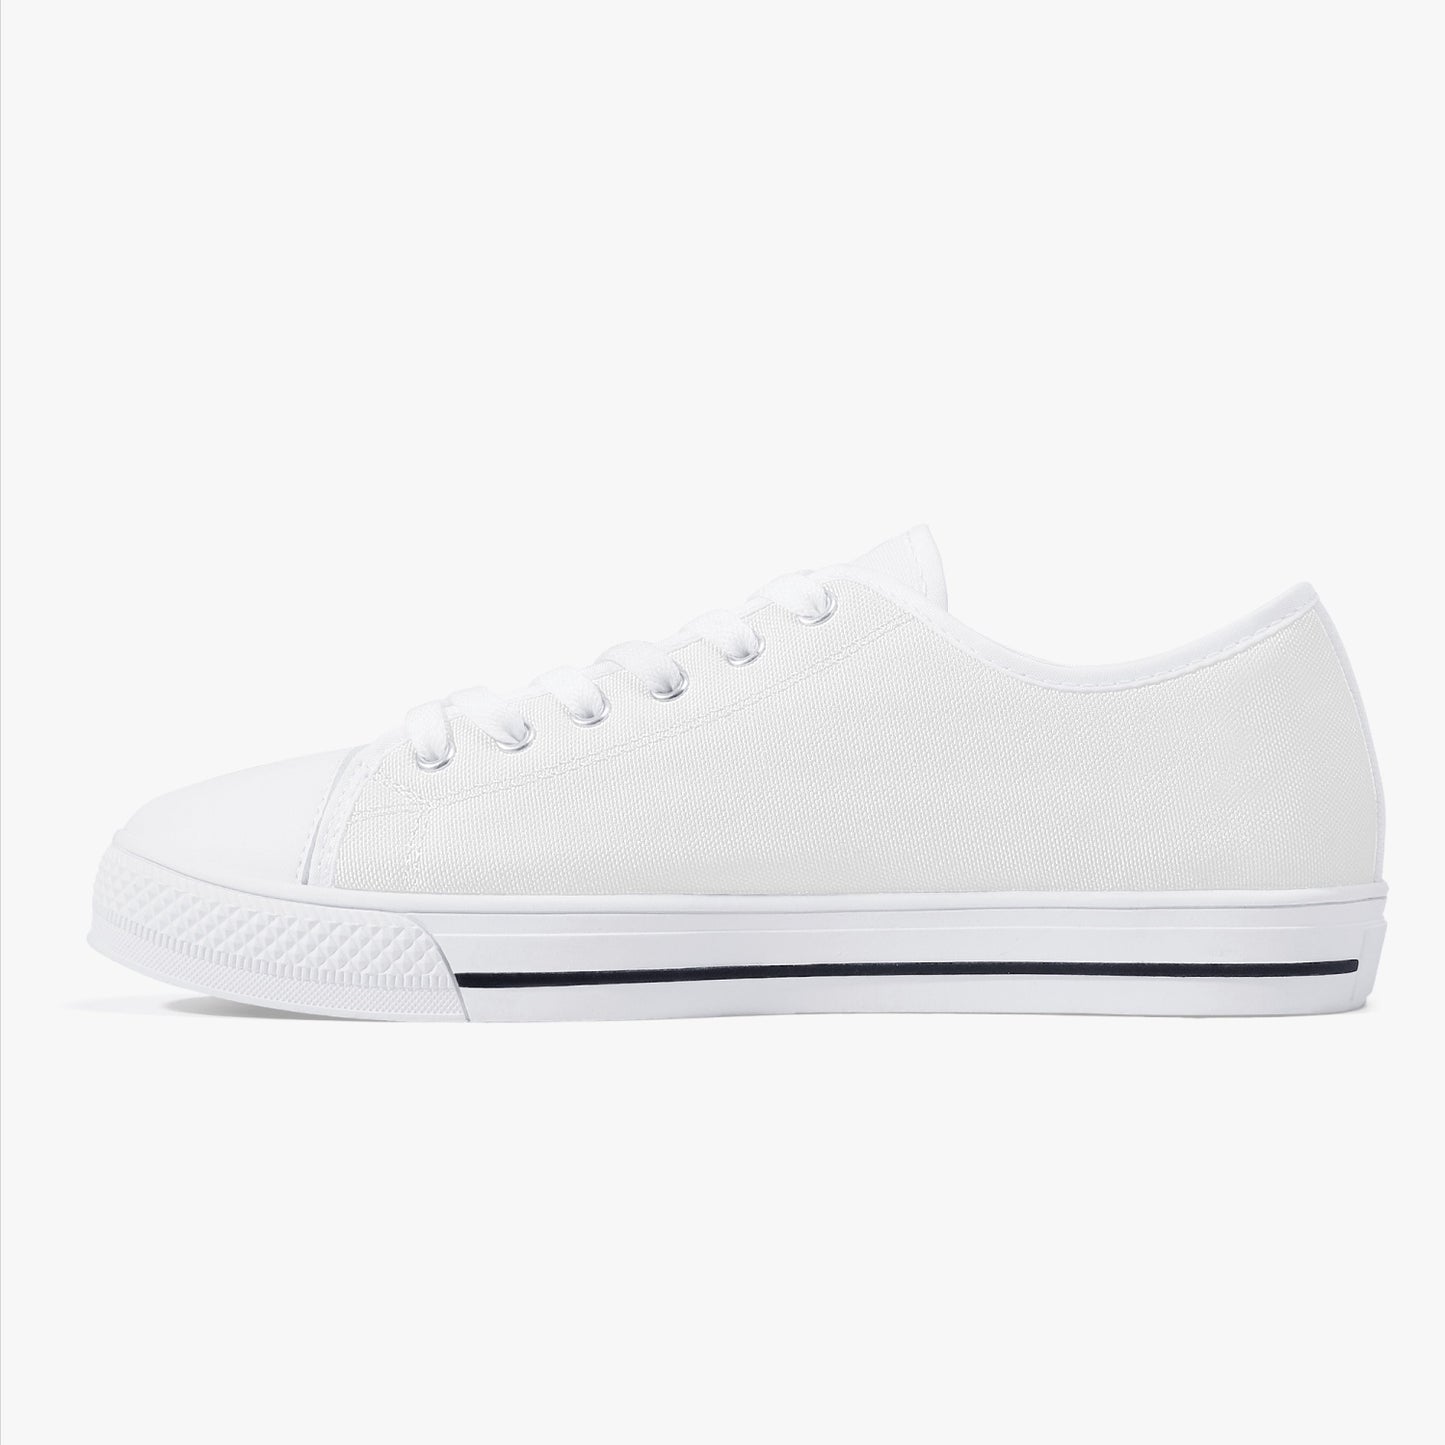 178. Classic Low-Top Canvas Shoes - White/Black-TraderShop82